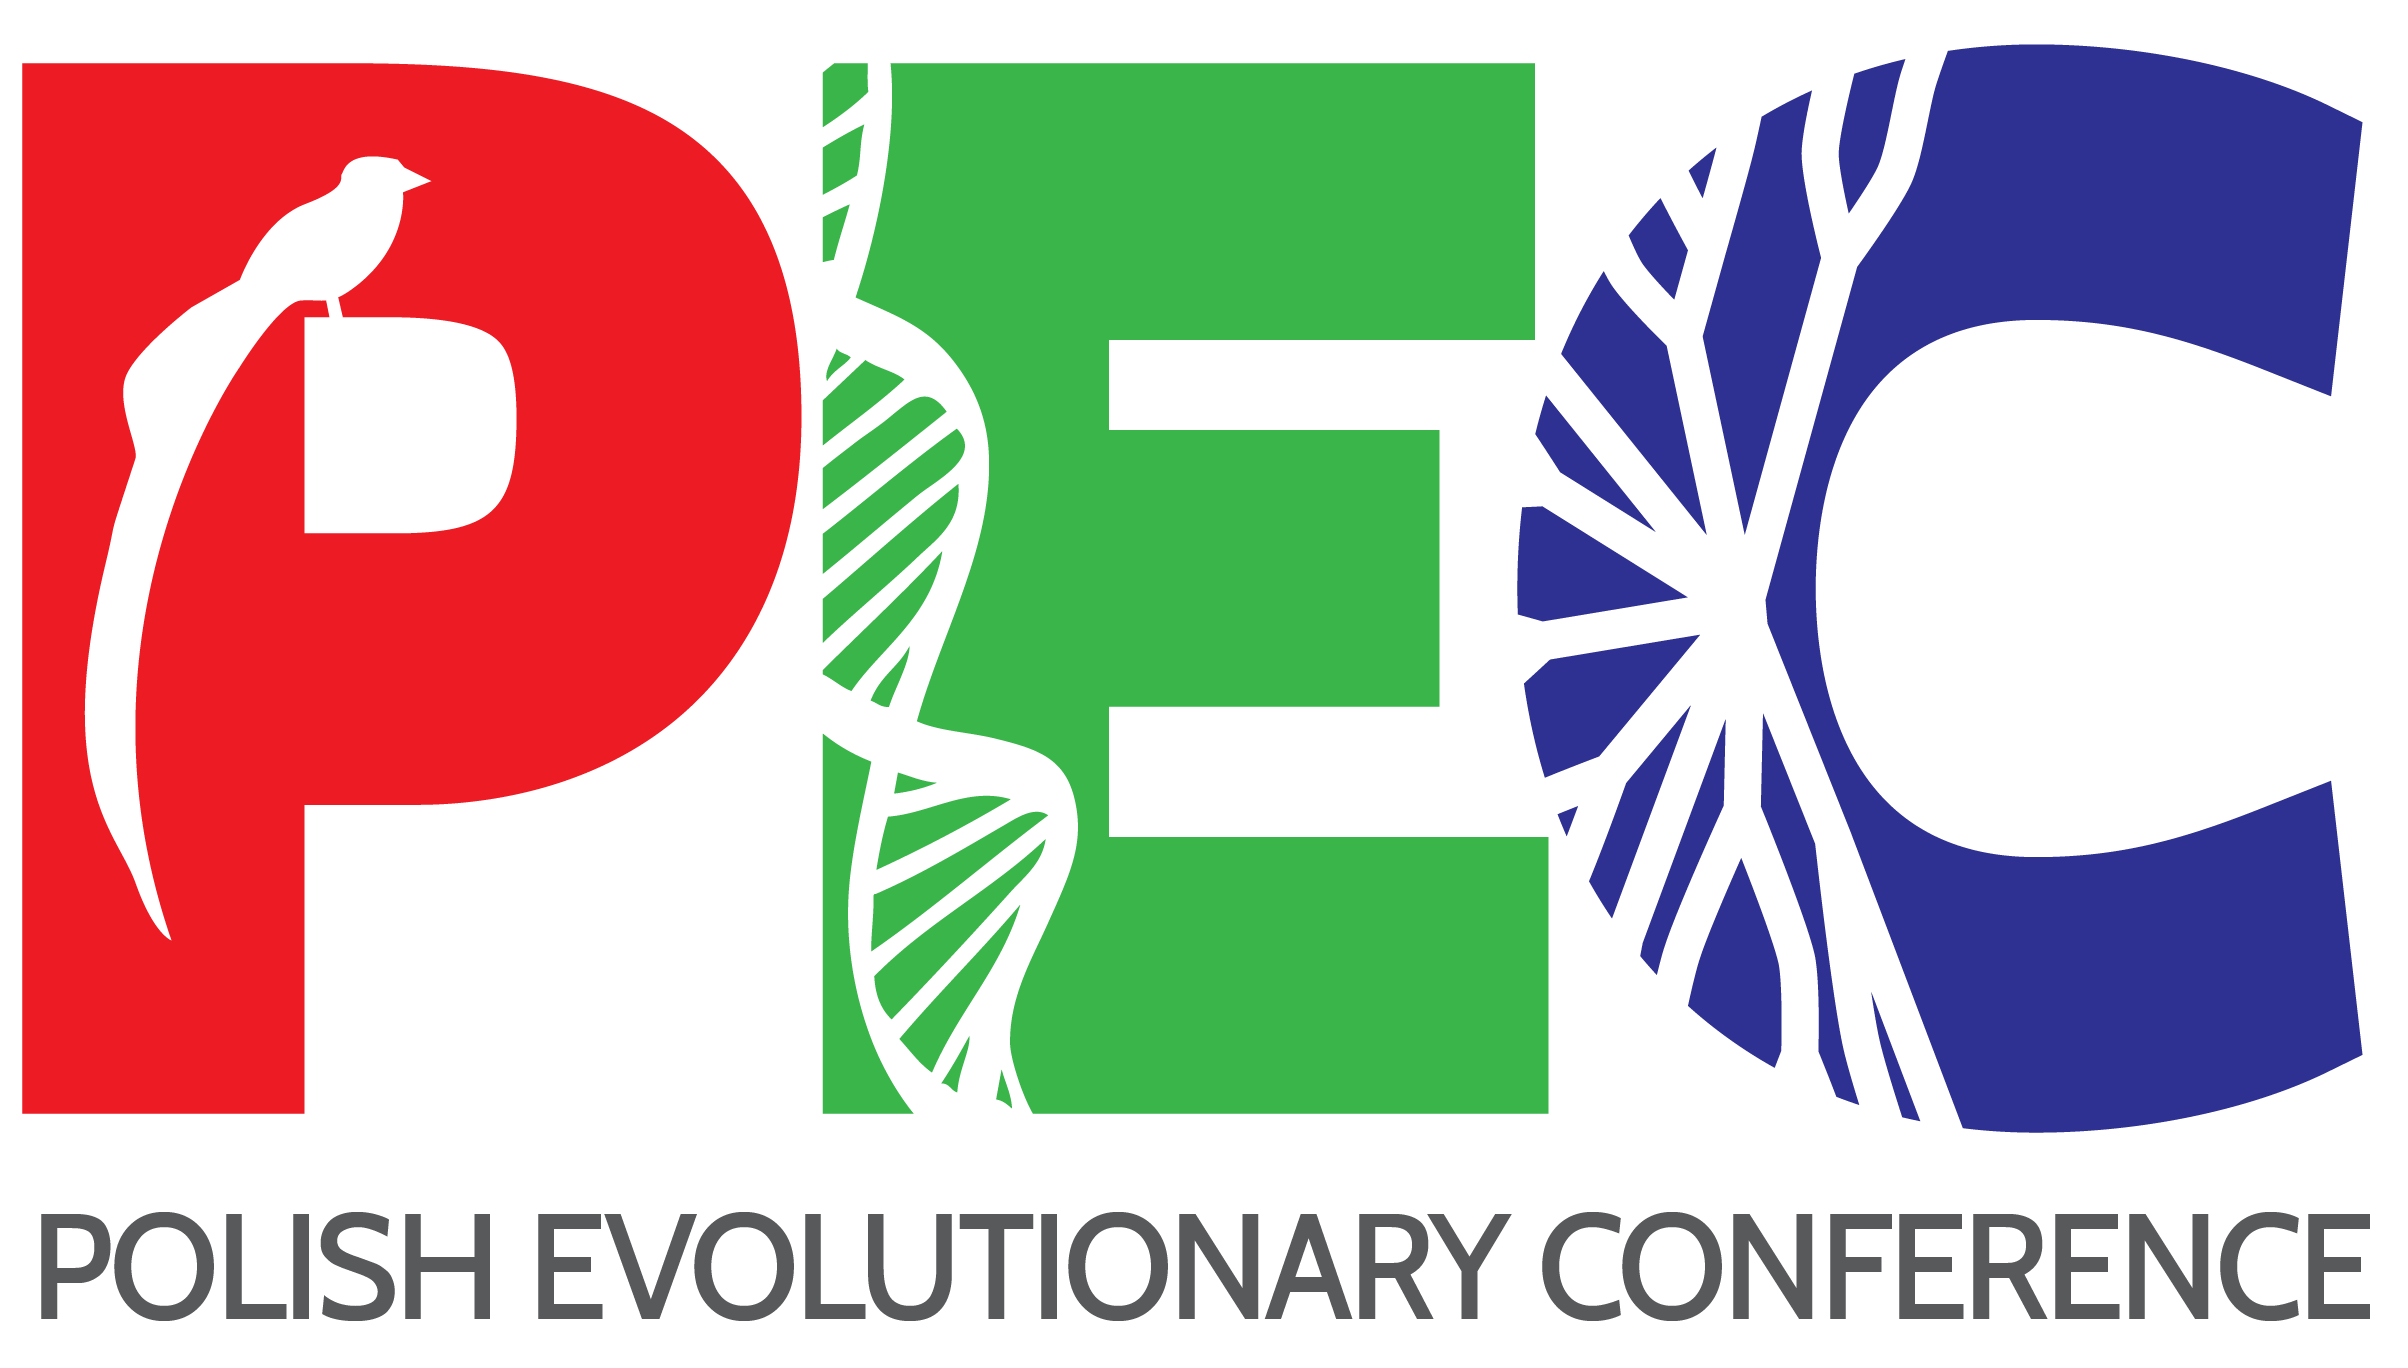 Logo of the conference. Big colorful PEC letters. P is red and inside it sits a bird, probably a male long-tailed widowbird Euplectes progne ("sacabula", wikłacz olbrzymi). Males of this species are known for their very long tails. The letter E is green and inside it is a DNA double helix. The letter C is blue and inside it is a symbolic cladogram. Under the letters there is an extension of the conference's abbreviated name: Polish Evolutionary Conference.